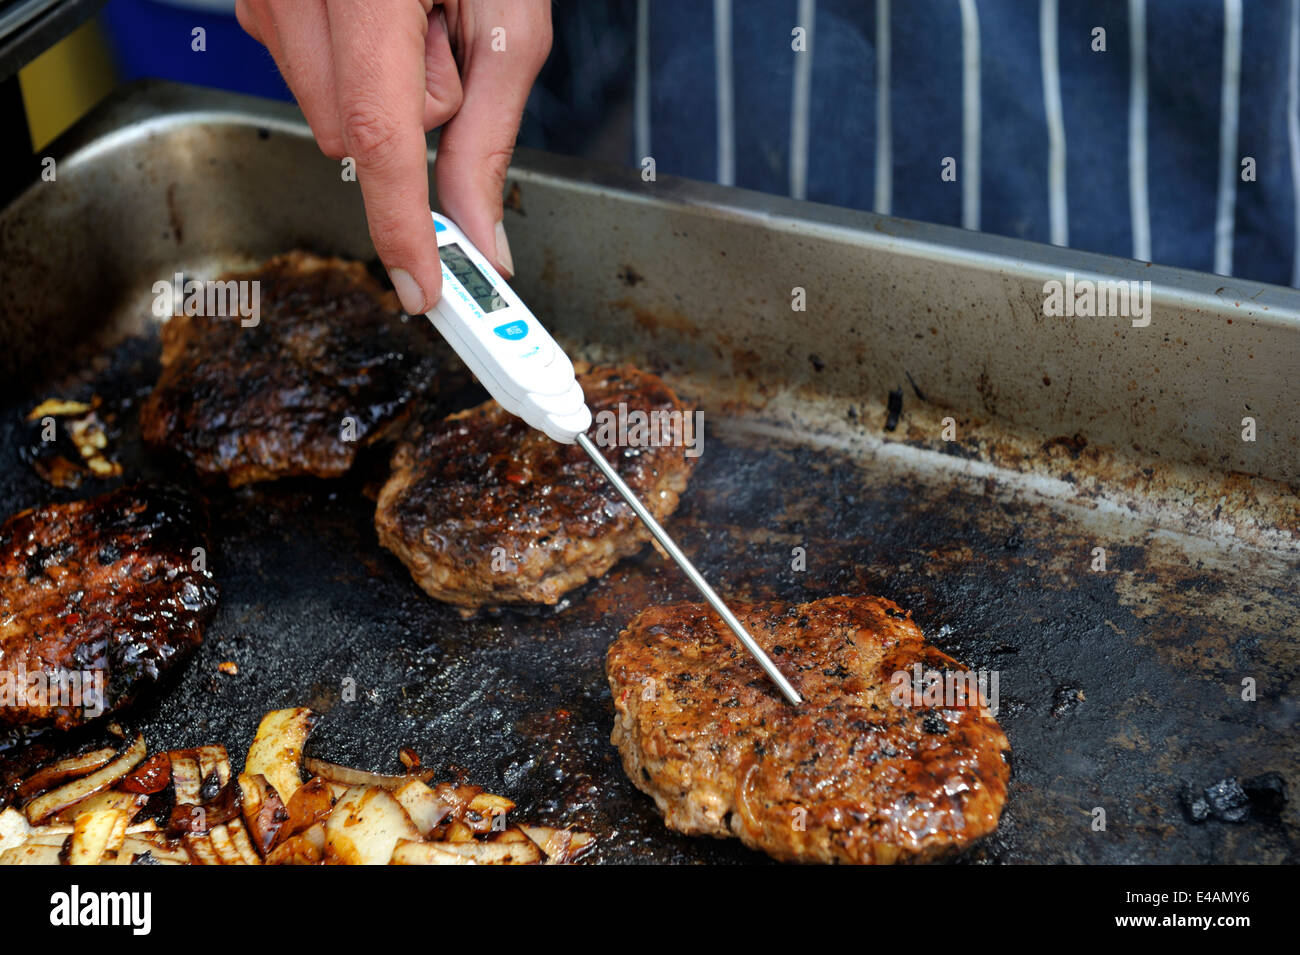 https://c8.alamy.com/comp/E4AMY6/chef-using-a-digital-meat-thermometer-to-check-the-cooking-temperature-E4AMY6.jpg